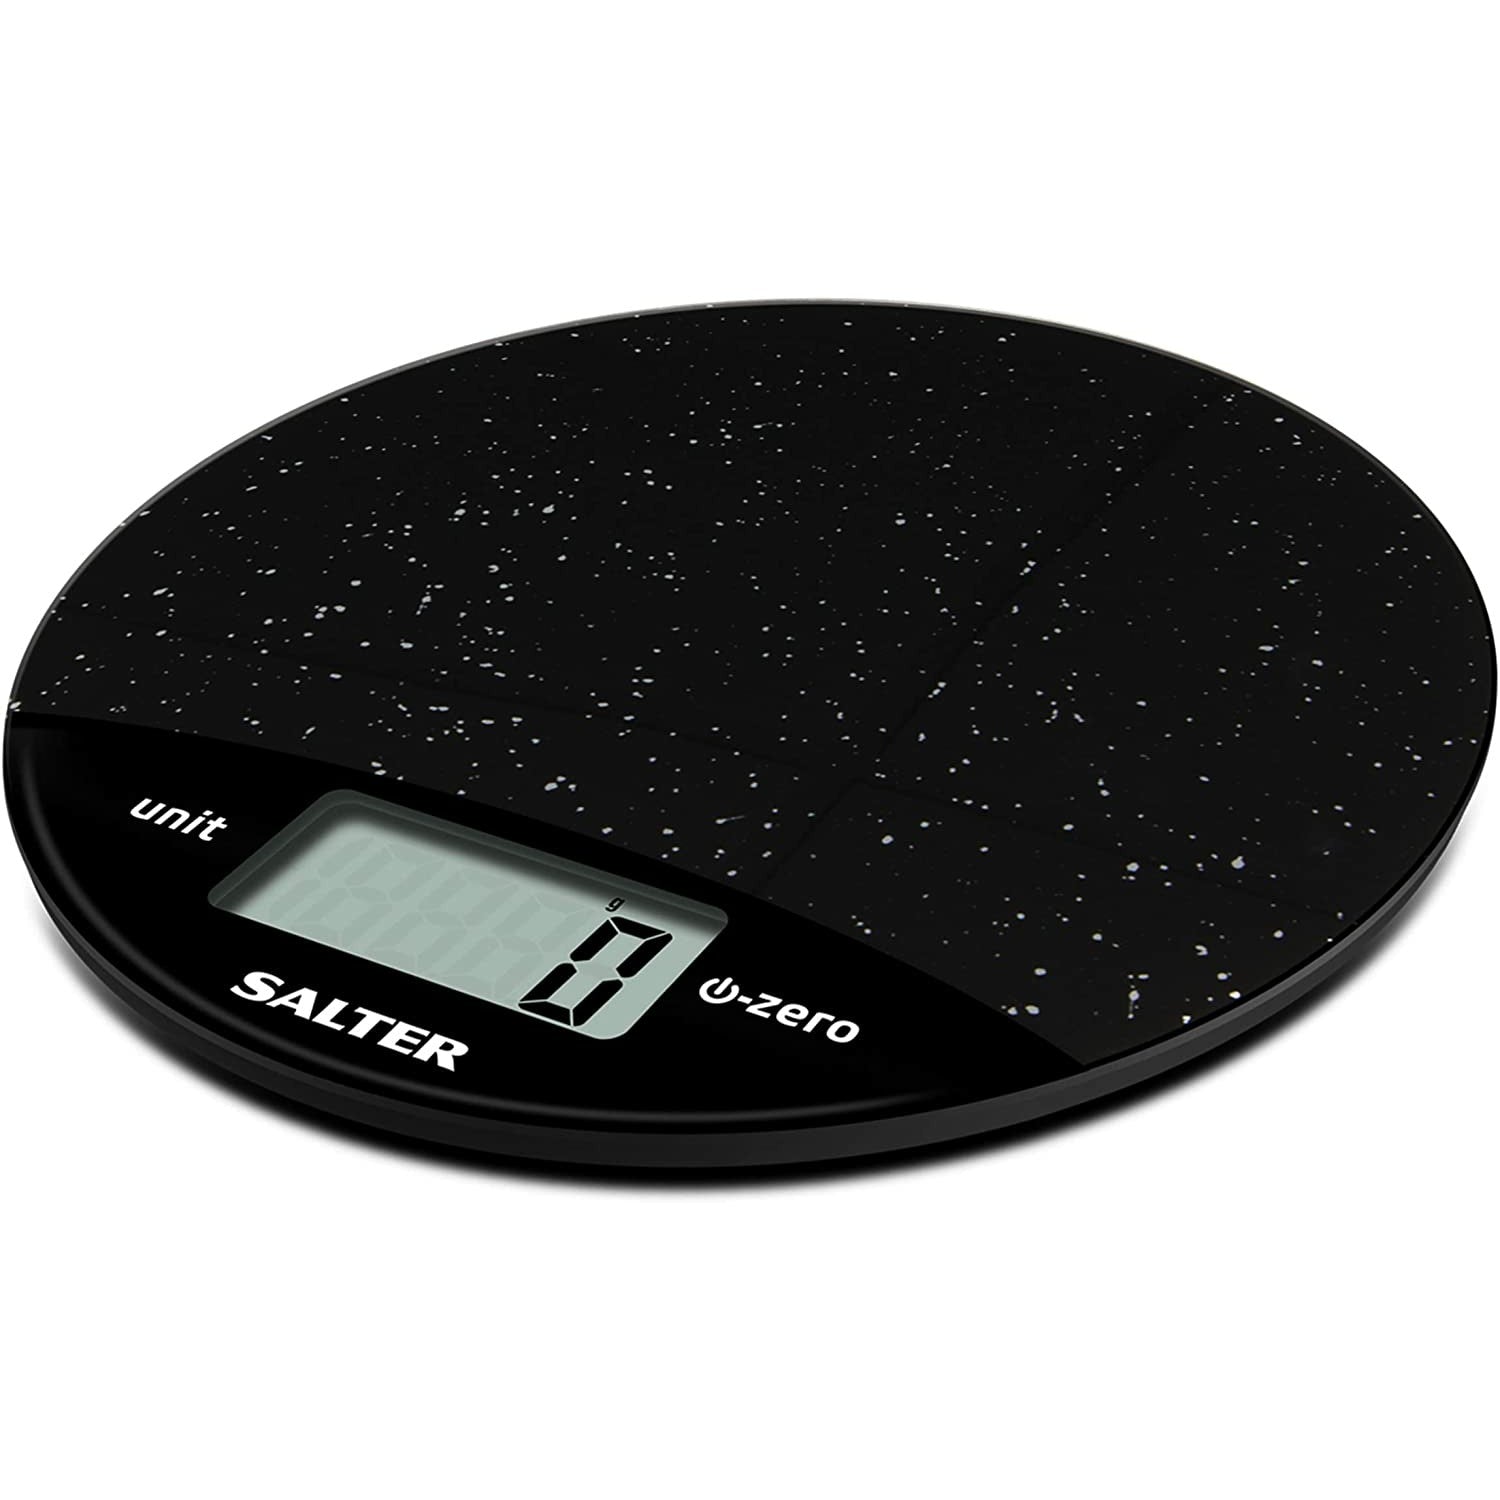 Salter Electronic Kitchen Scales - Ennis Electrical